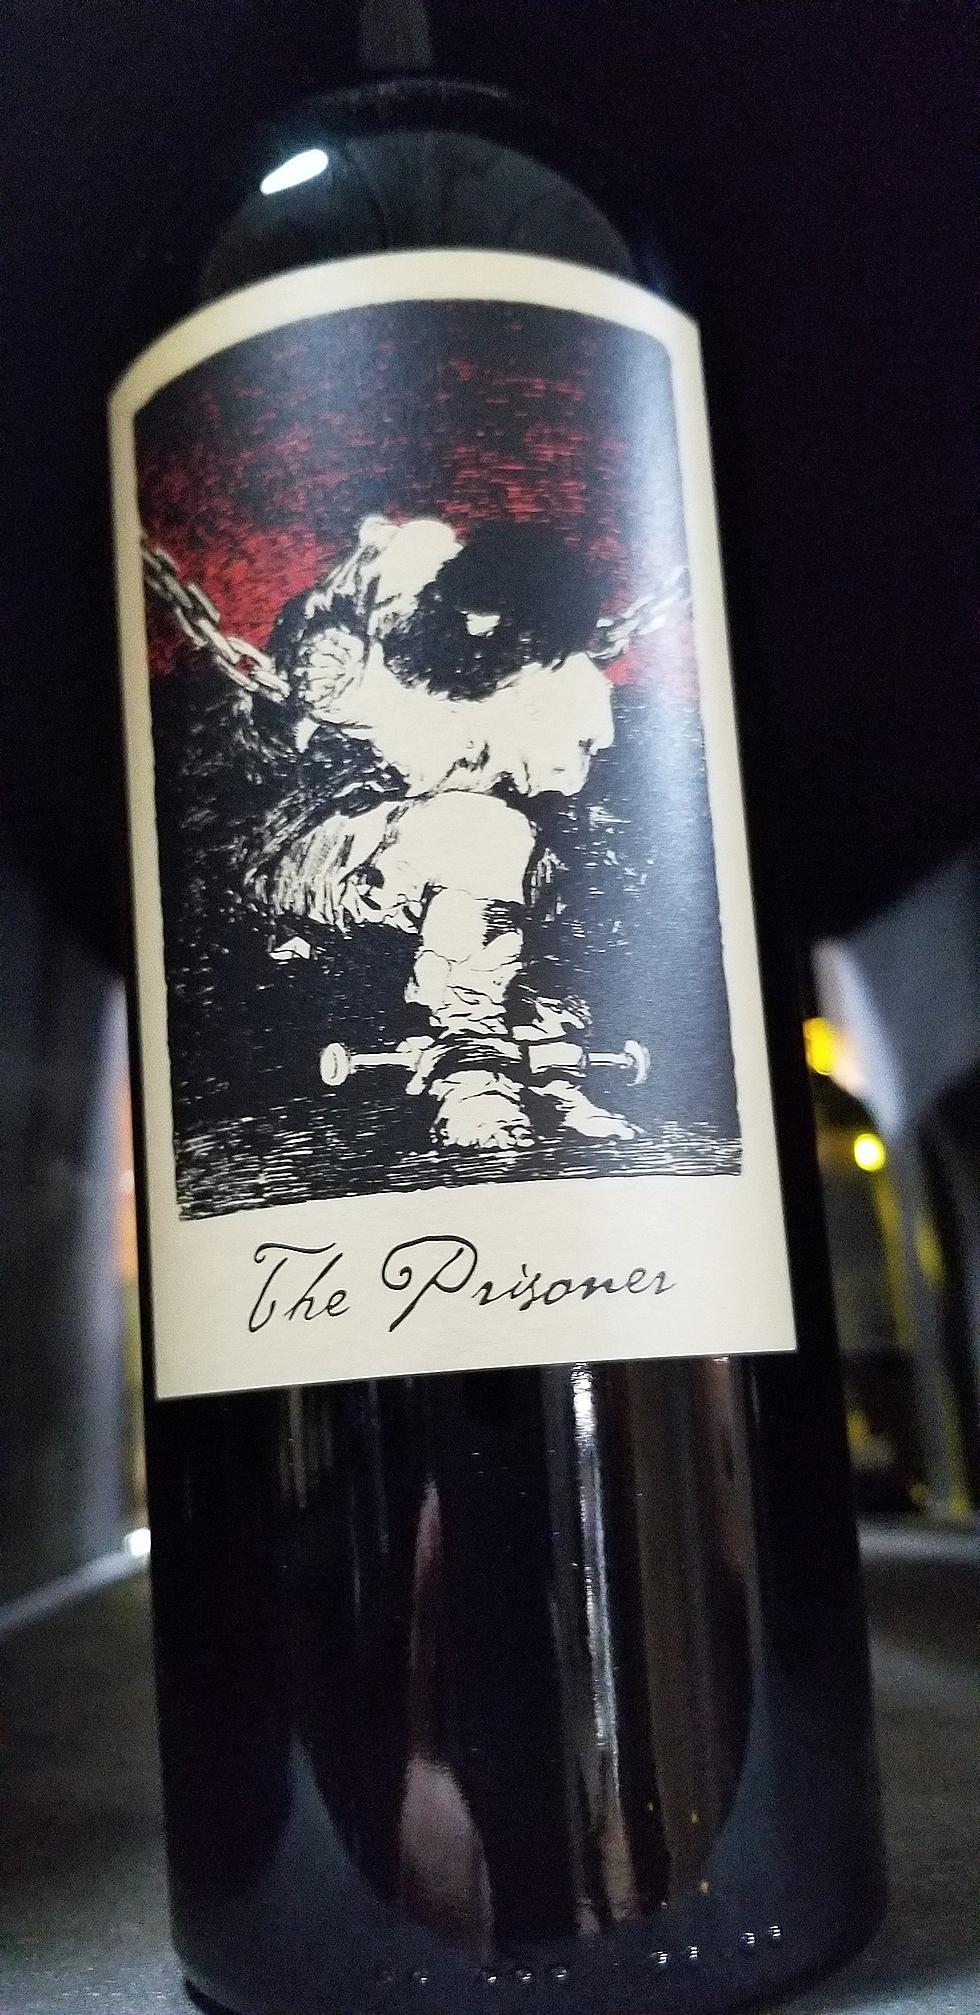 Wines of the Week Tastes Like Prisoner at a Price You’ll Like